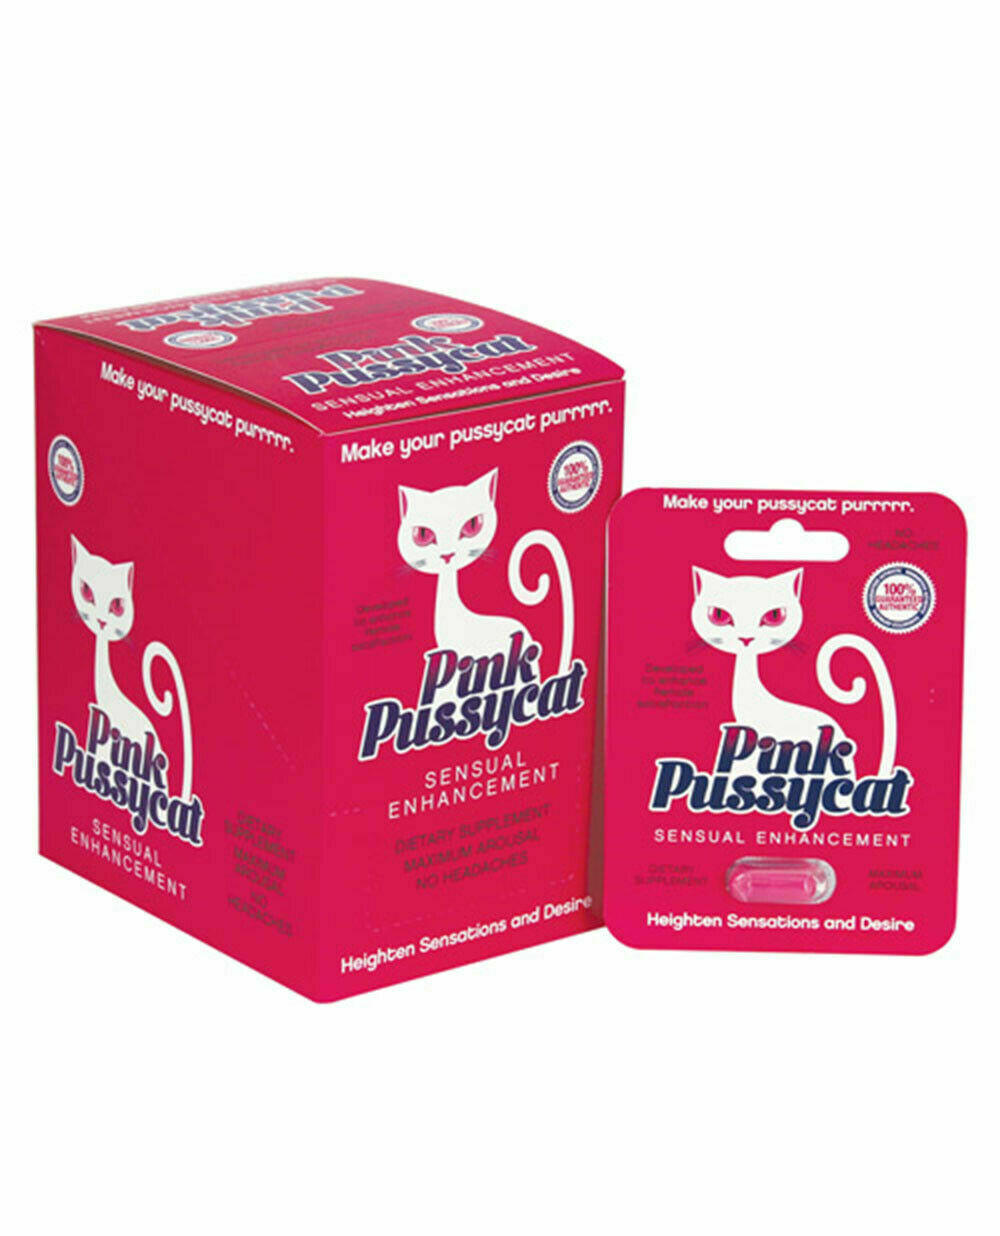 24 PINK PUSSYCAT FEMALE WOMEN SEXUAL ENHANCEMENT PILLS WHOLE DISPLAY OF 24 ...